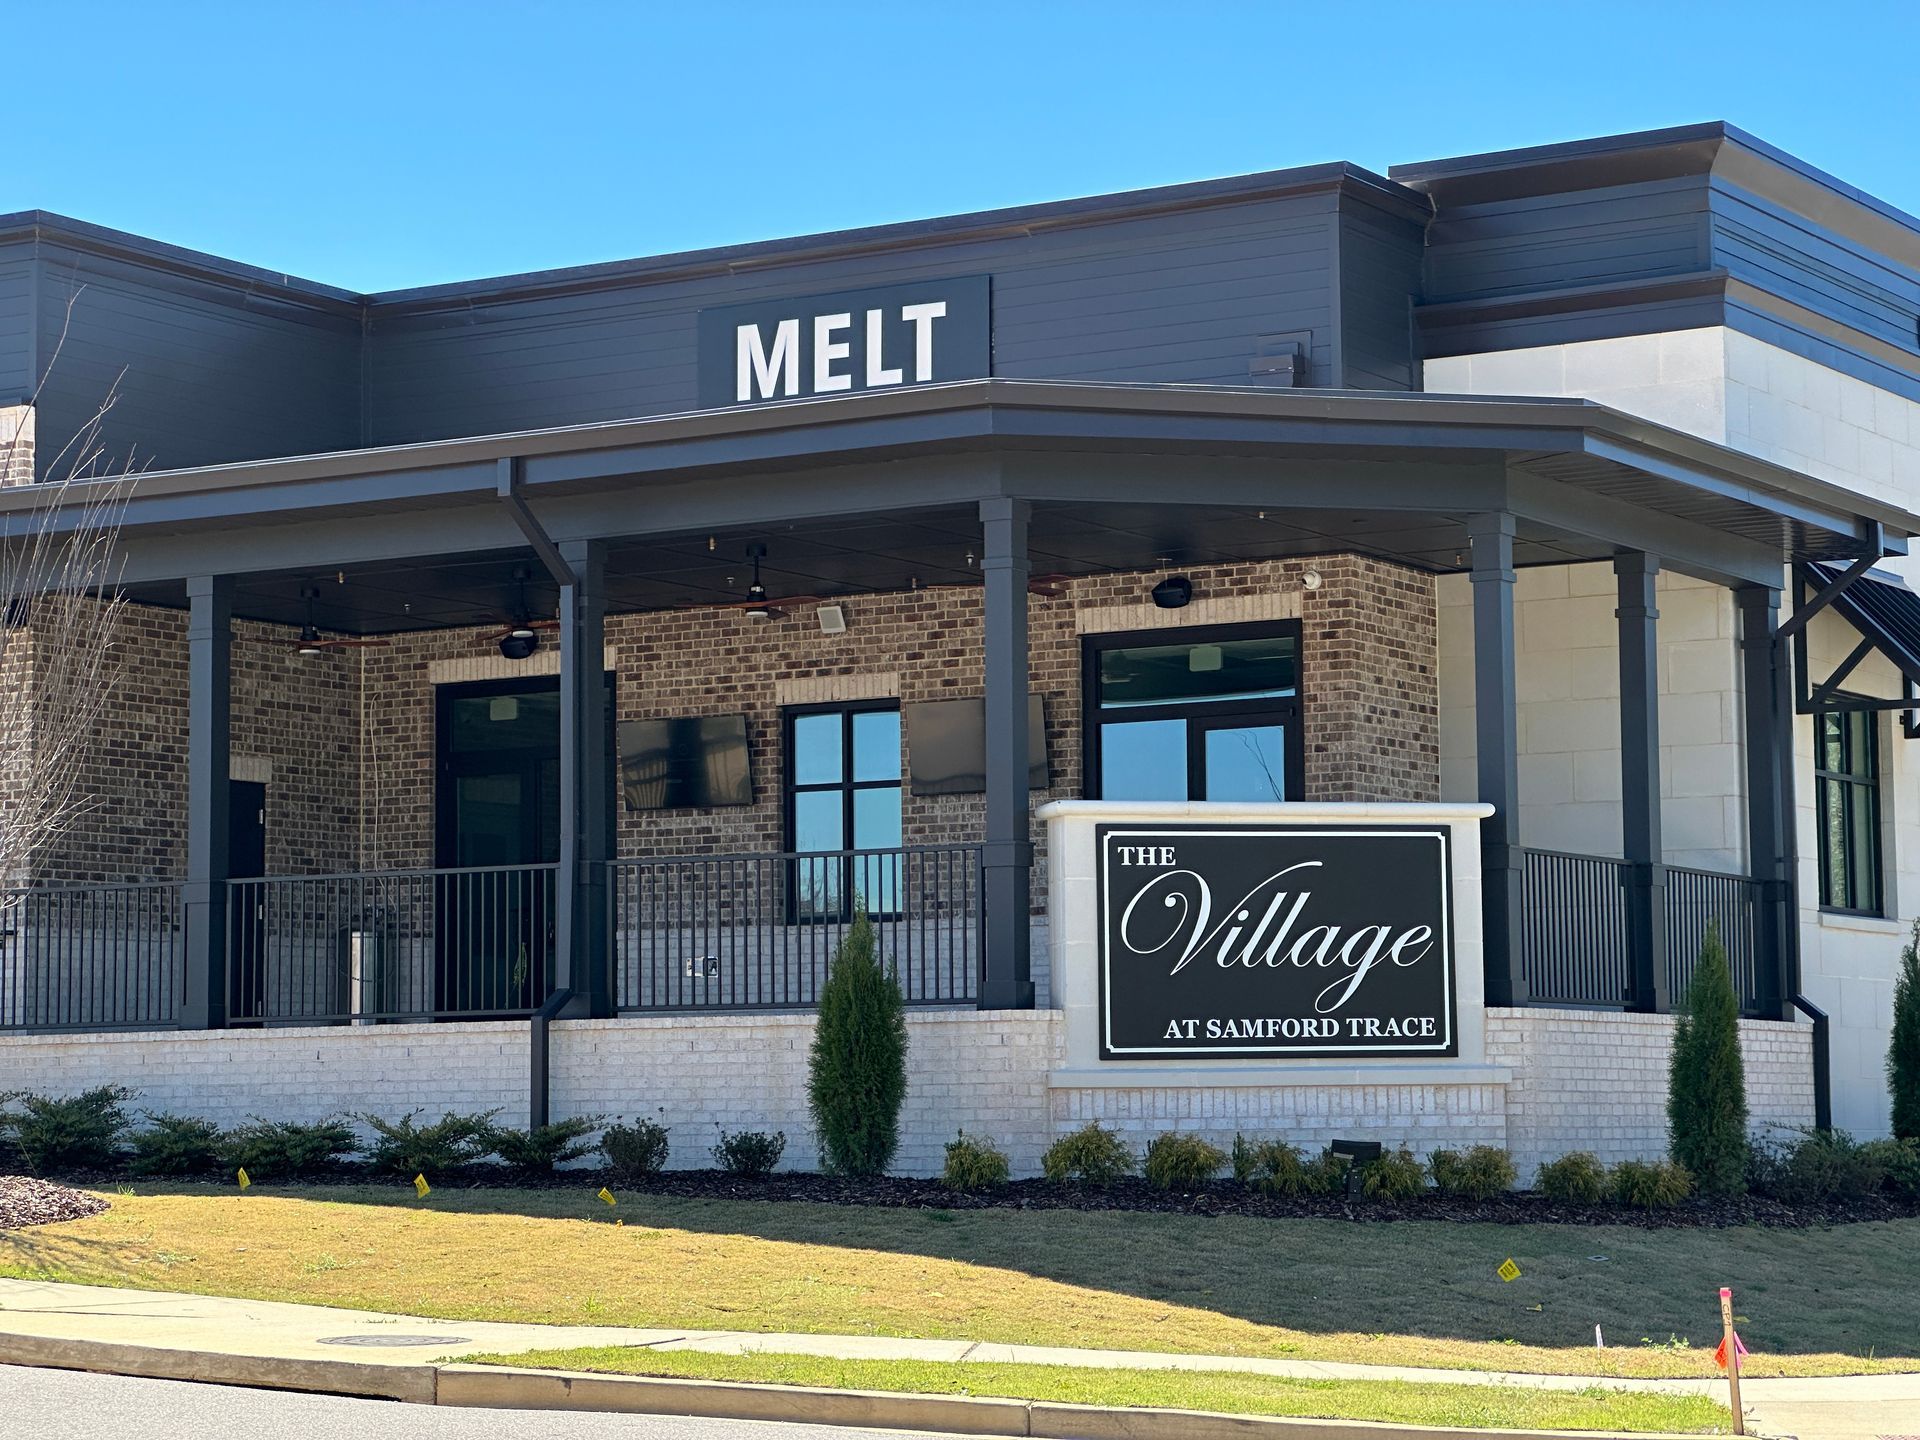 A large building with a porch and a sign that says melt village.